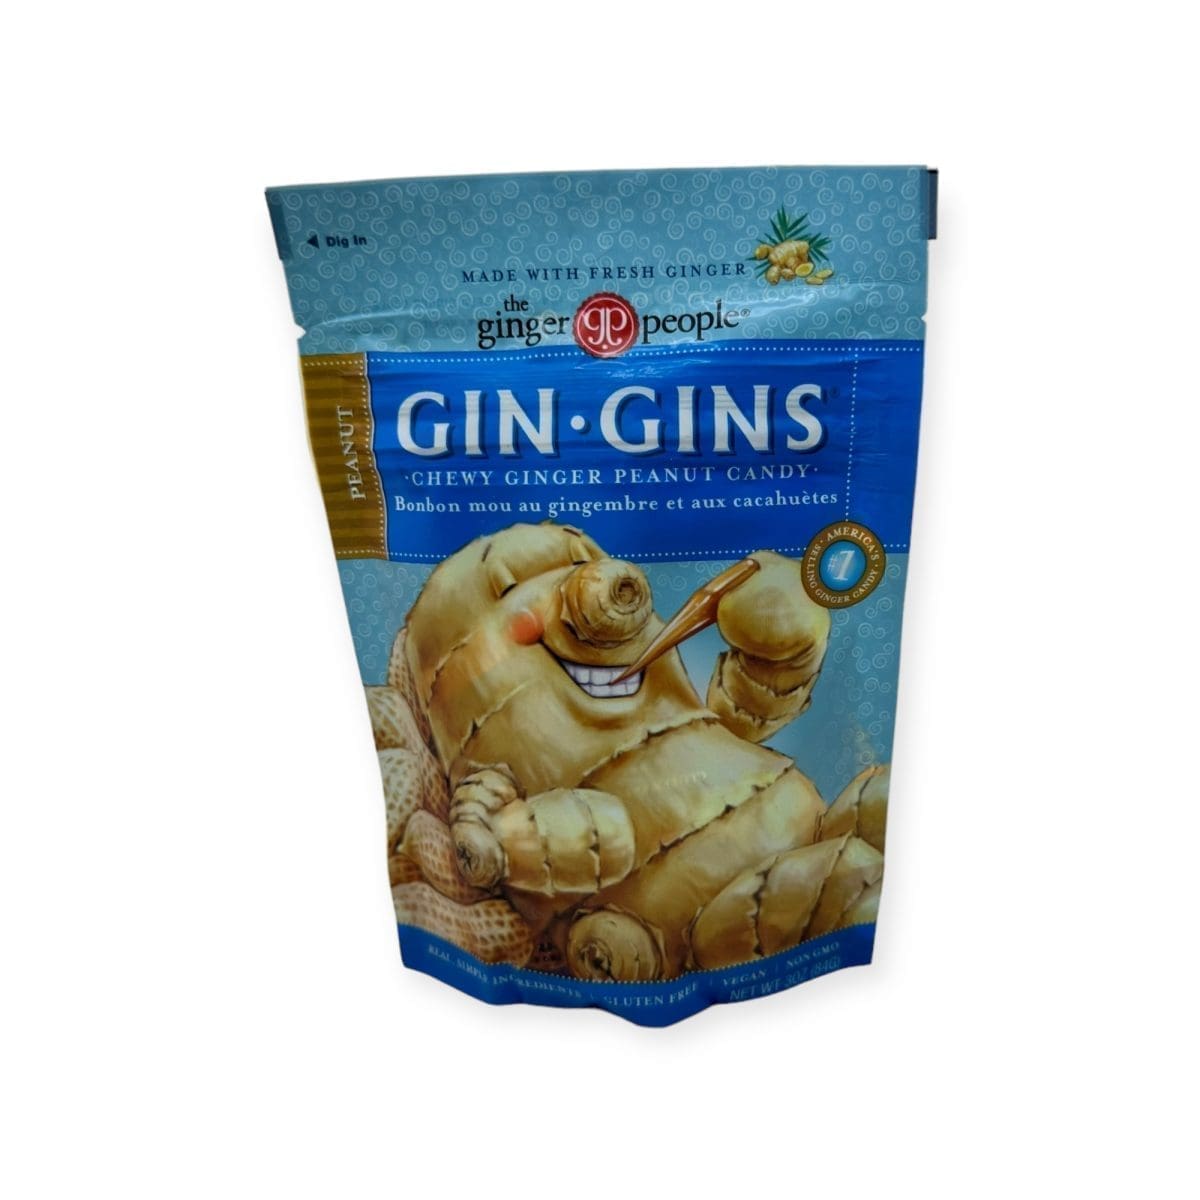 The Ginger People Gin Gins Ginger Peanut Candy (84g)